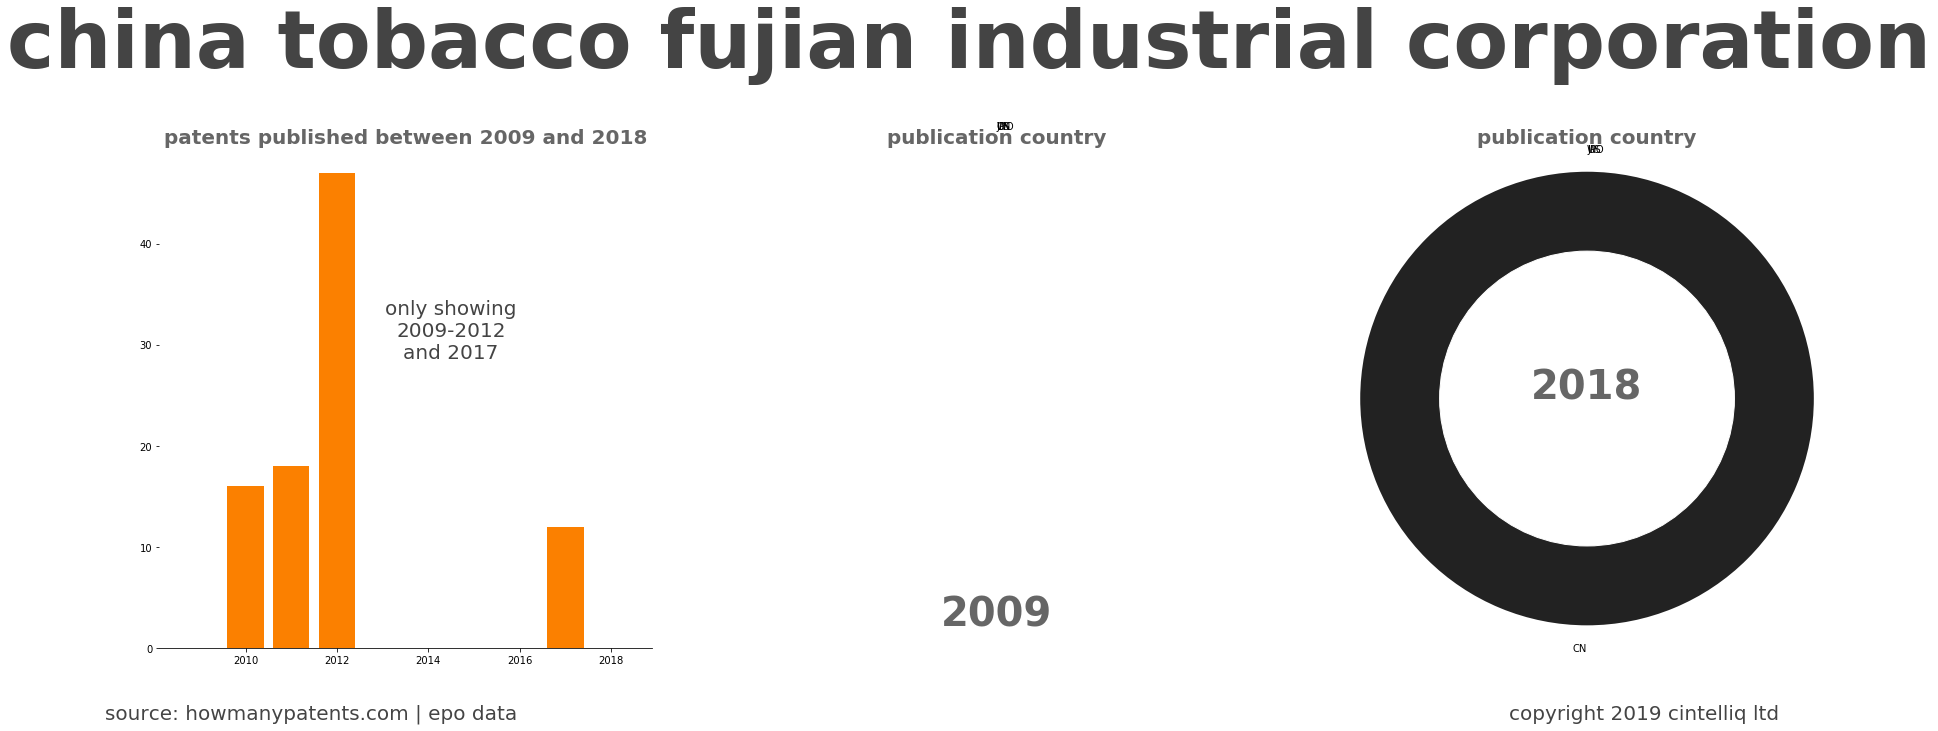 summary of patents for China Tobacco Fujian Industrial Corporation